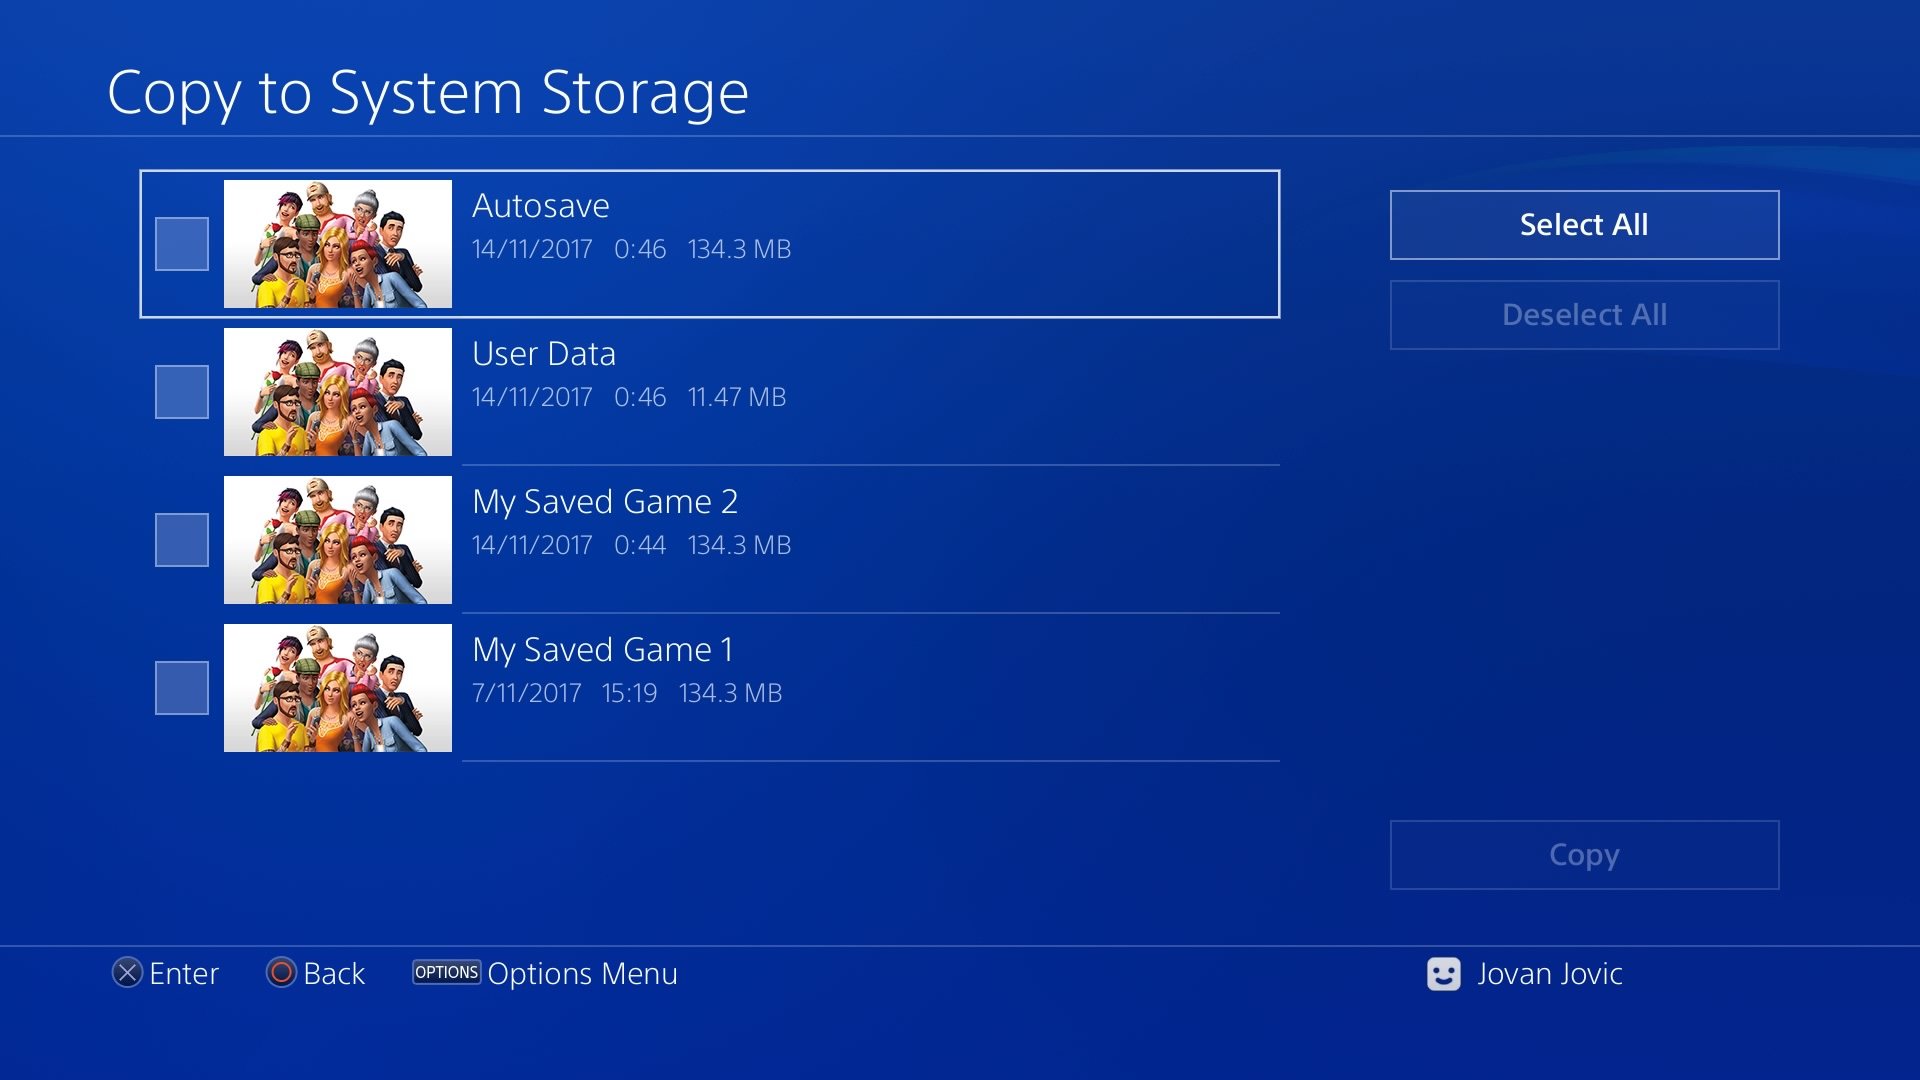 The Sims 4: How to backup Save Game files on PS4